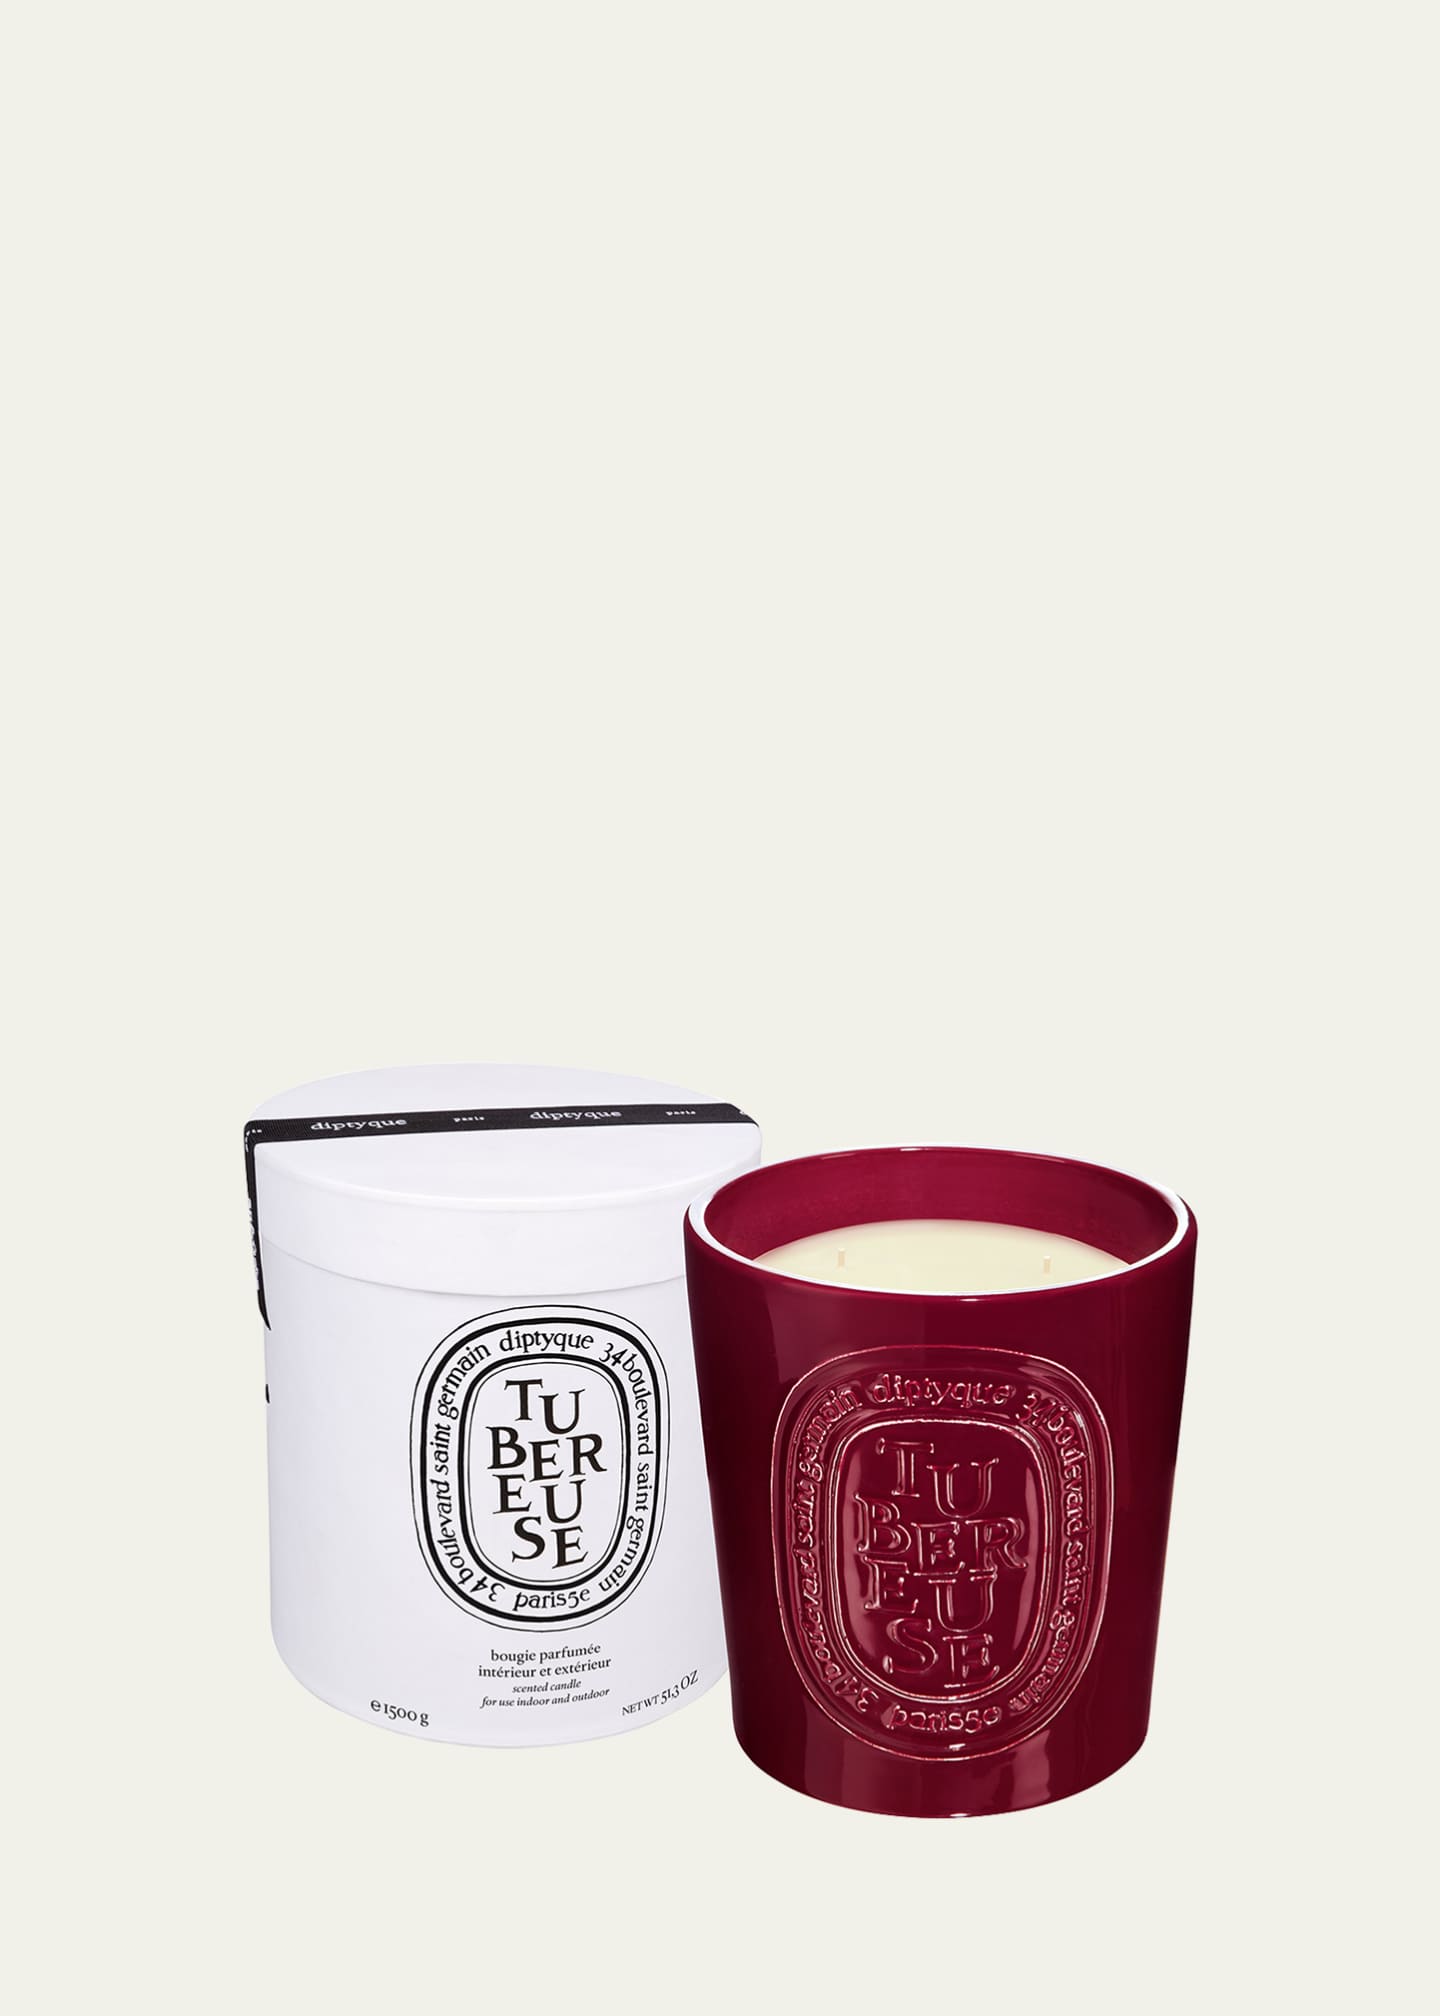 DIPTYQUE Tubereuse (Tuberose) Scented Candle, 51.3 oz. Image 2 of 2